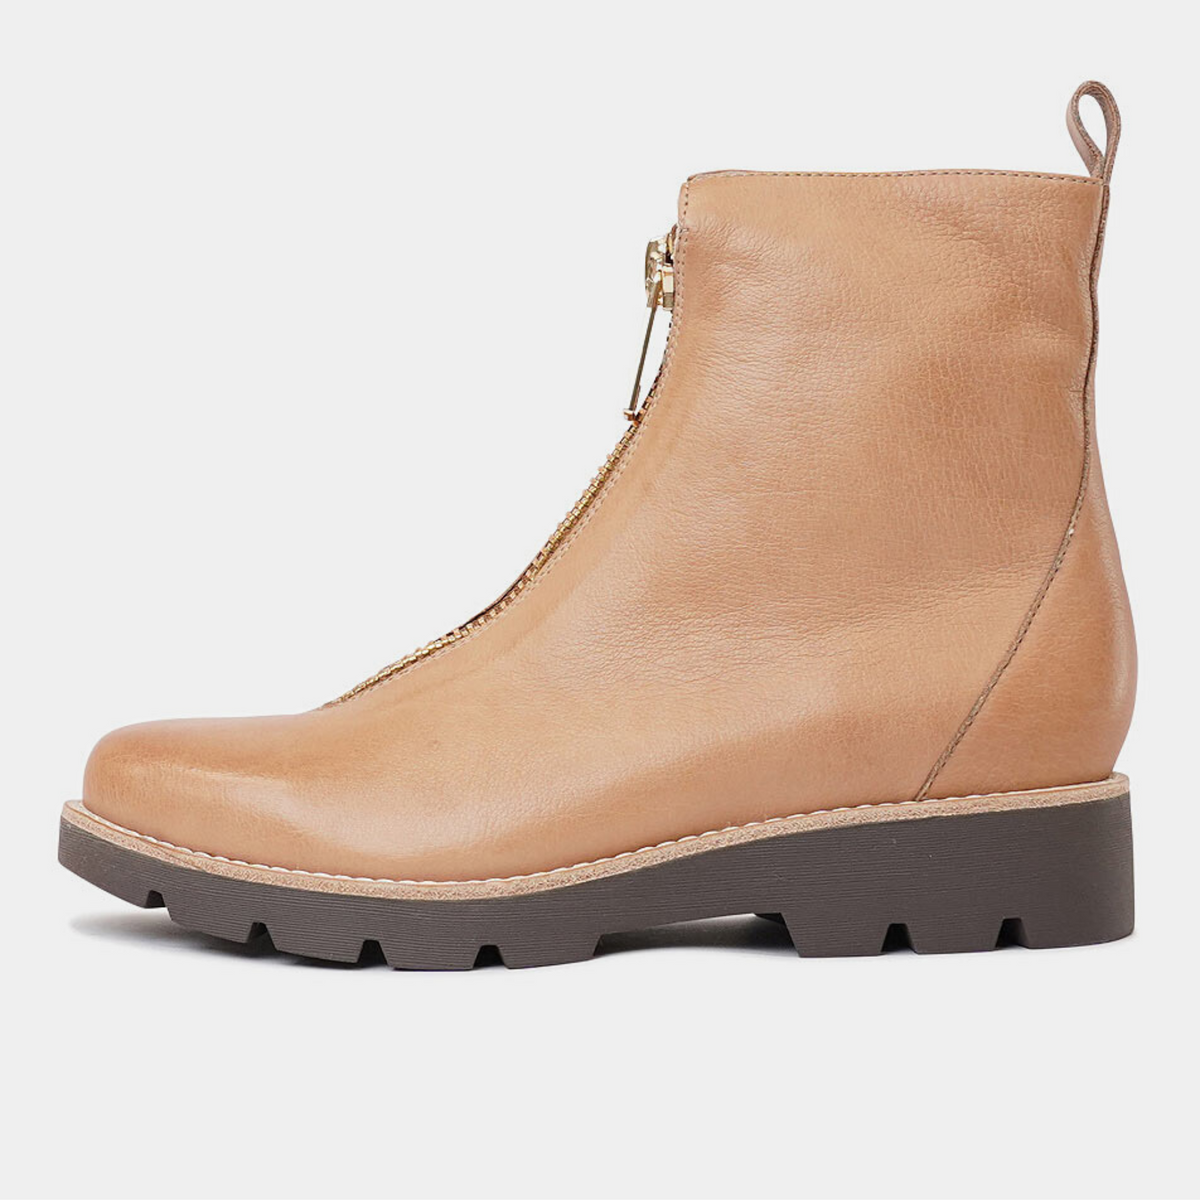 Mieyette Dark Tan Leather Ankle Boots